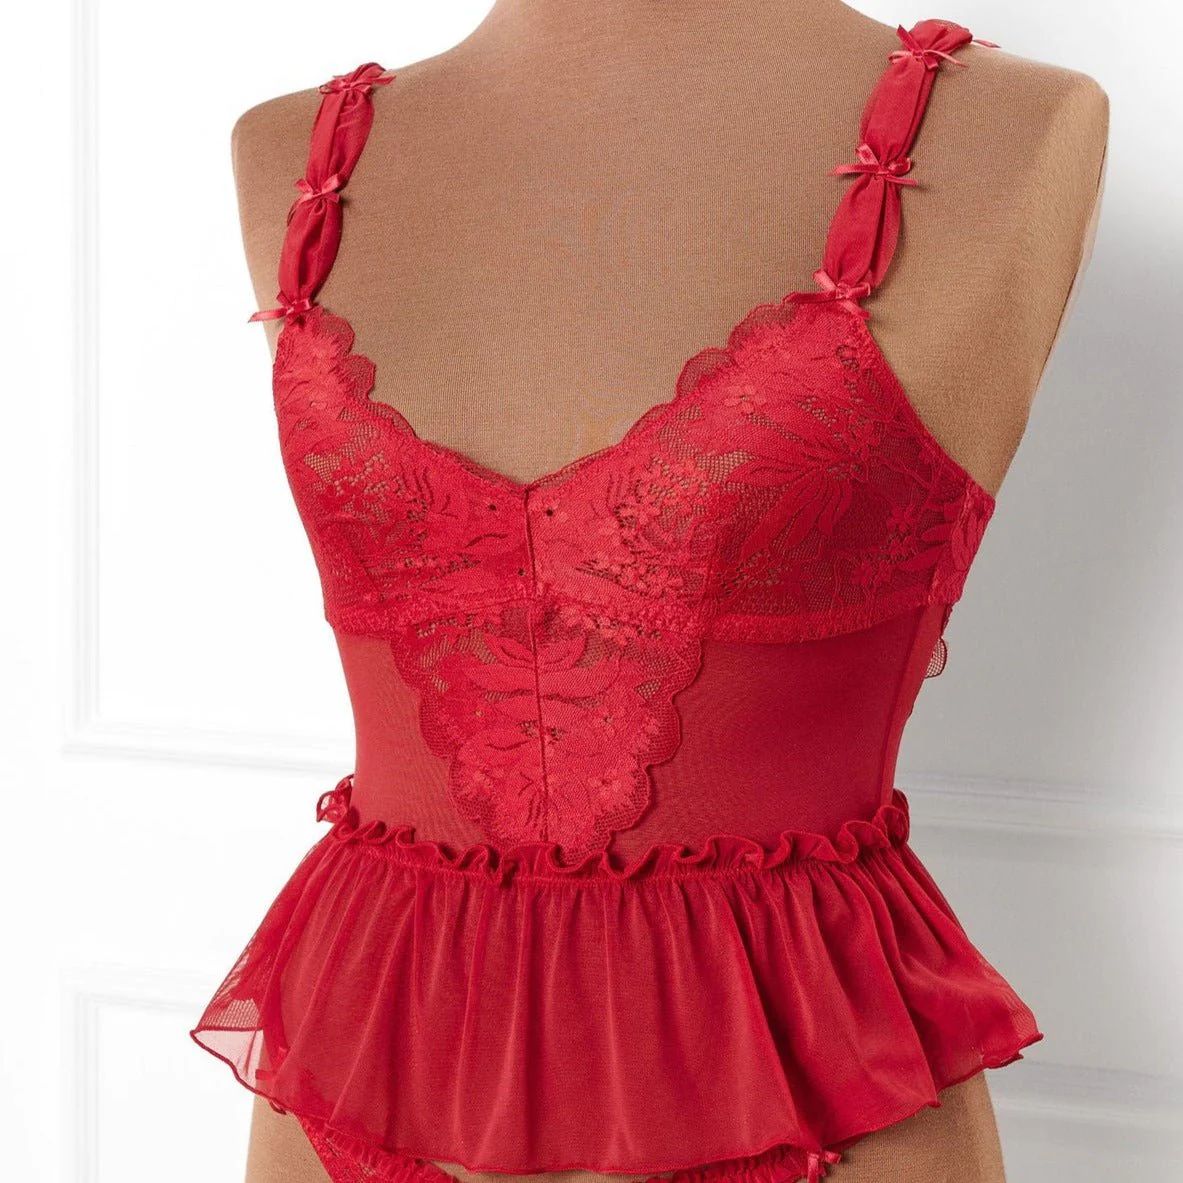 Lace & Mesh Peplum Corset - Scarlet Red | Mentionables